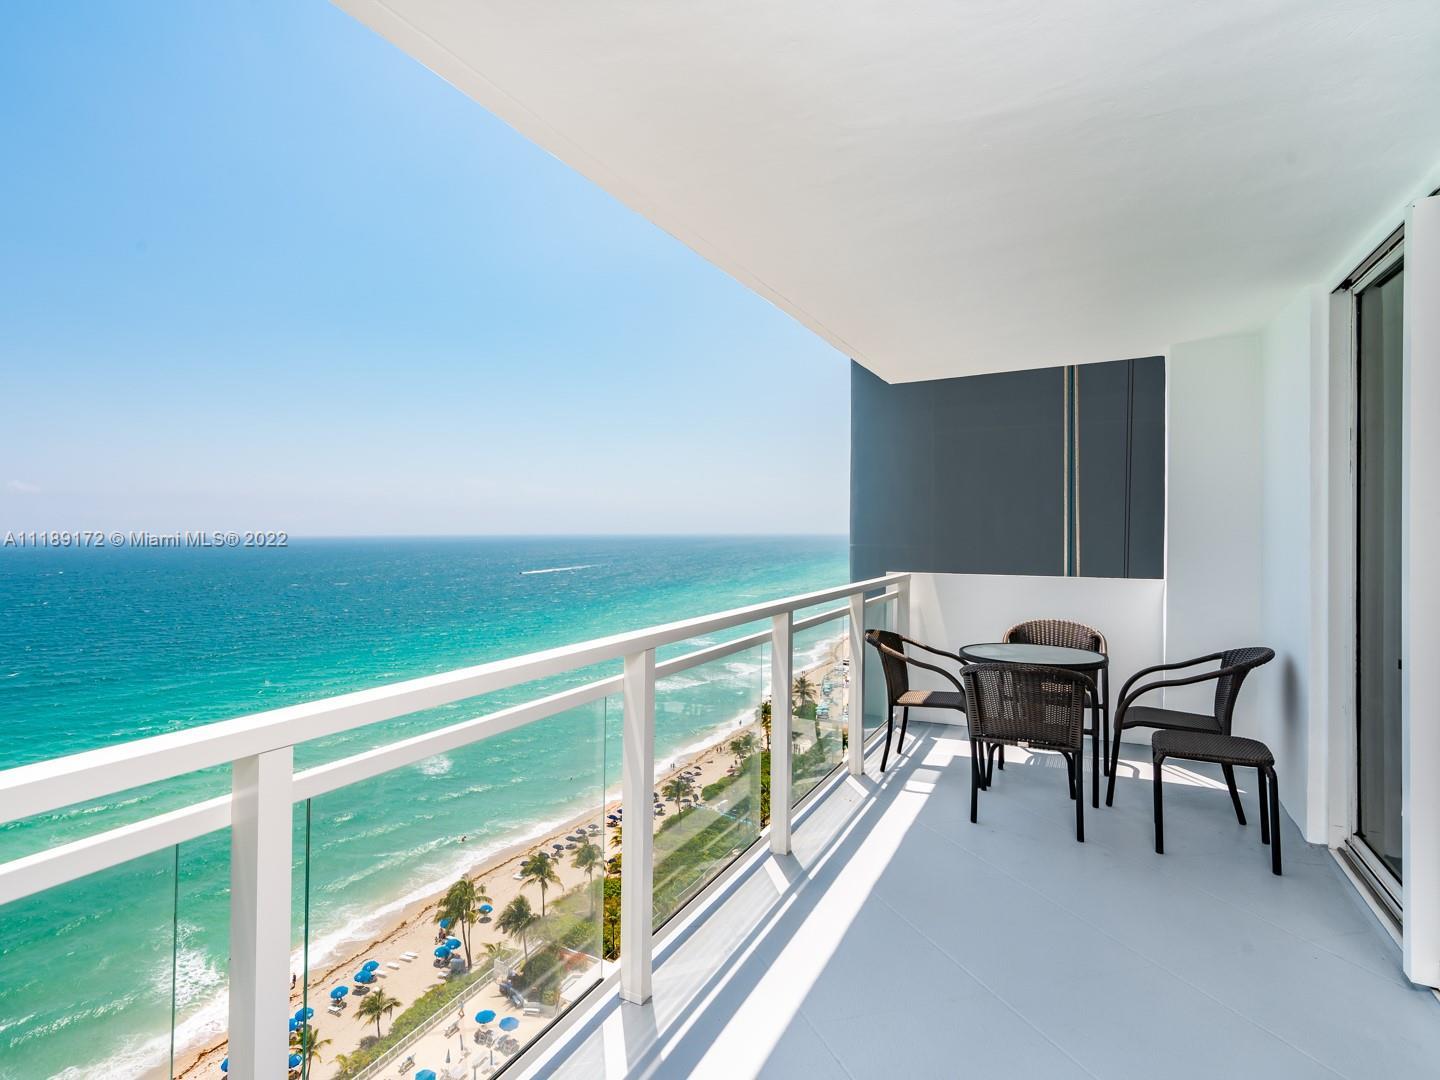 Breathtaking unobstructed direct ocean views from this renovated 2BR / 2BTH high floor unit. Recentl